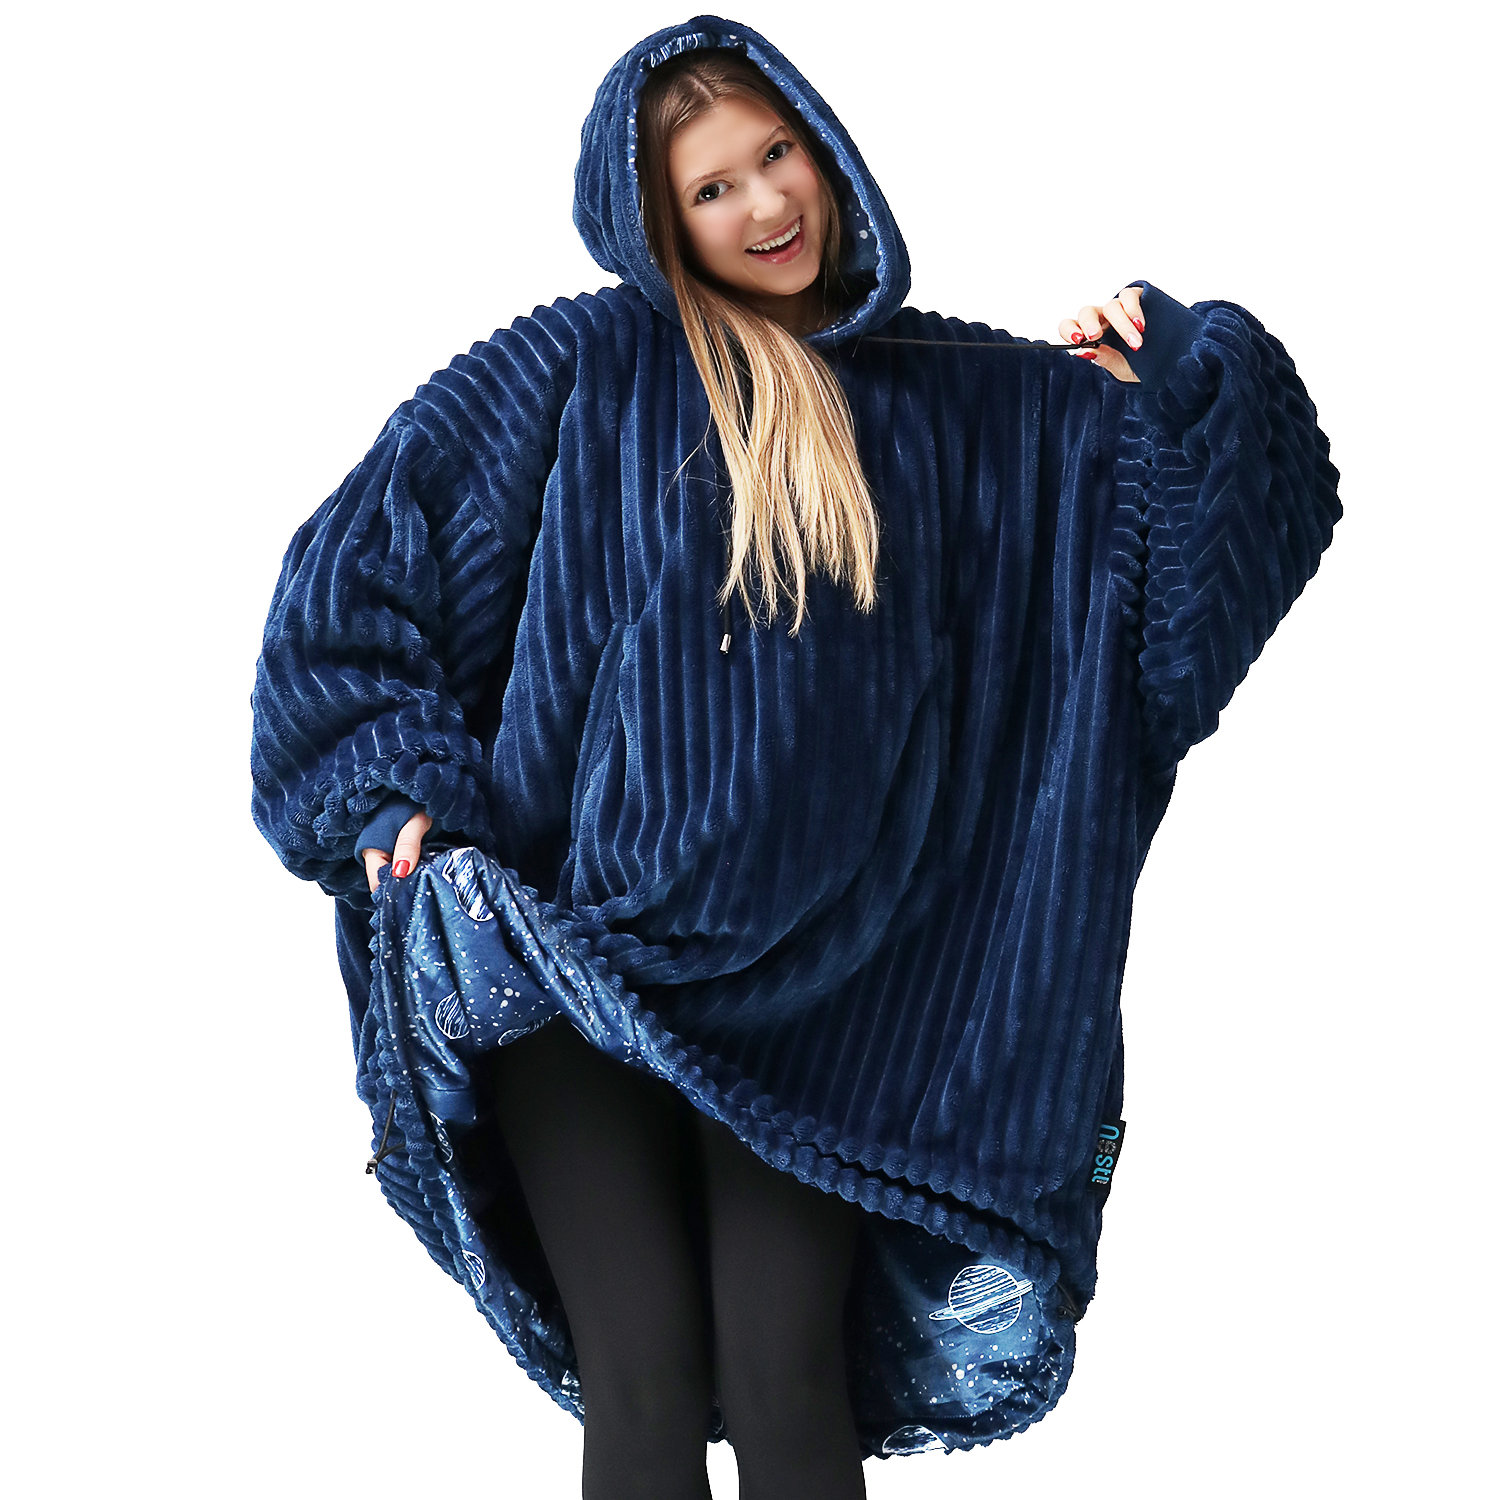 You can get a giant teddy fleece-lined hoodie blanket for these